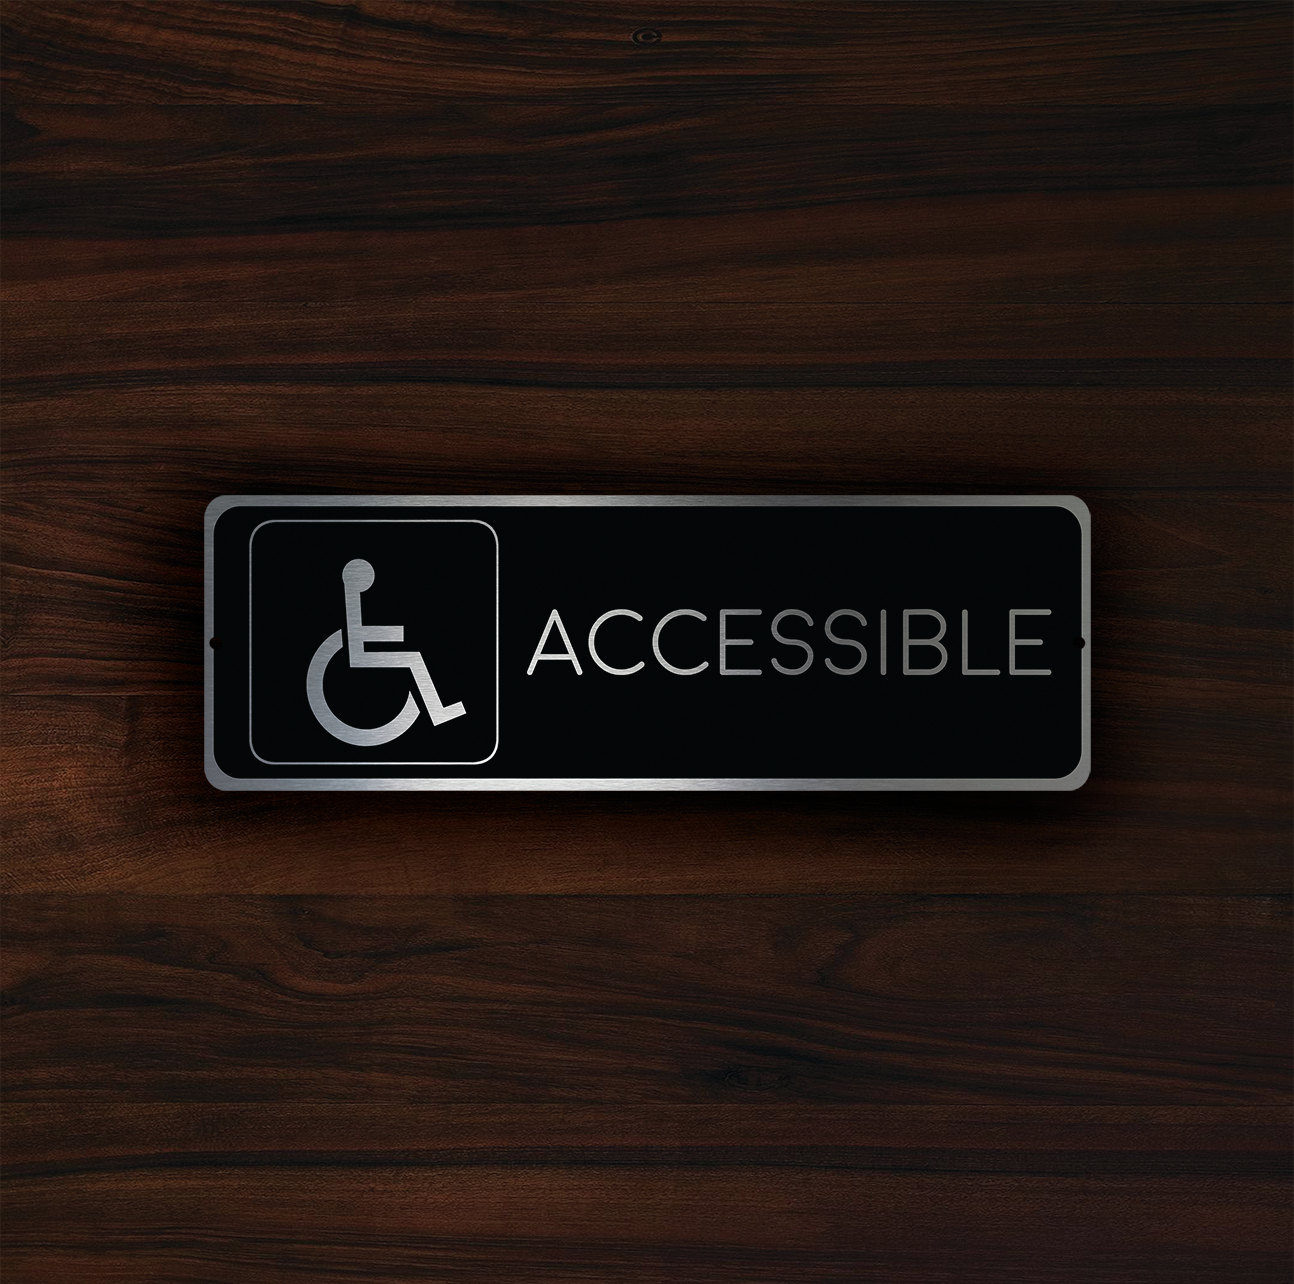 ACCESSIBLE RESTROOM SIGN